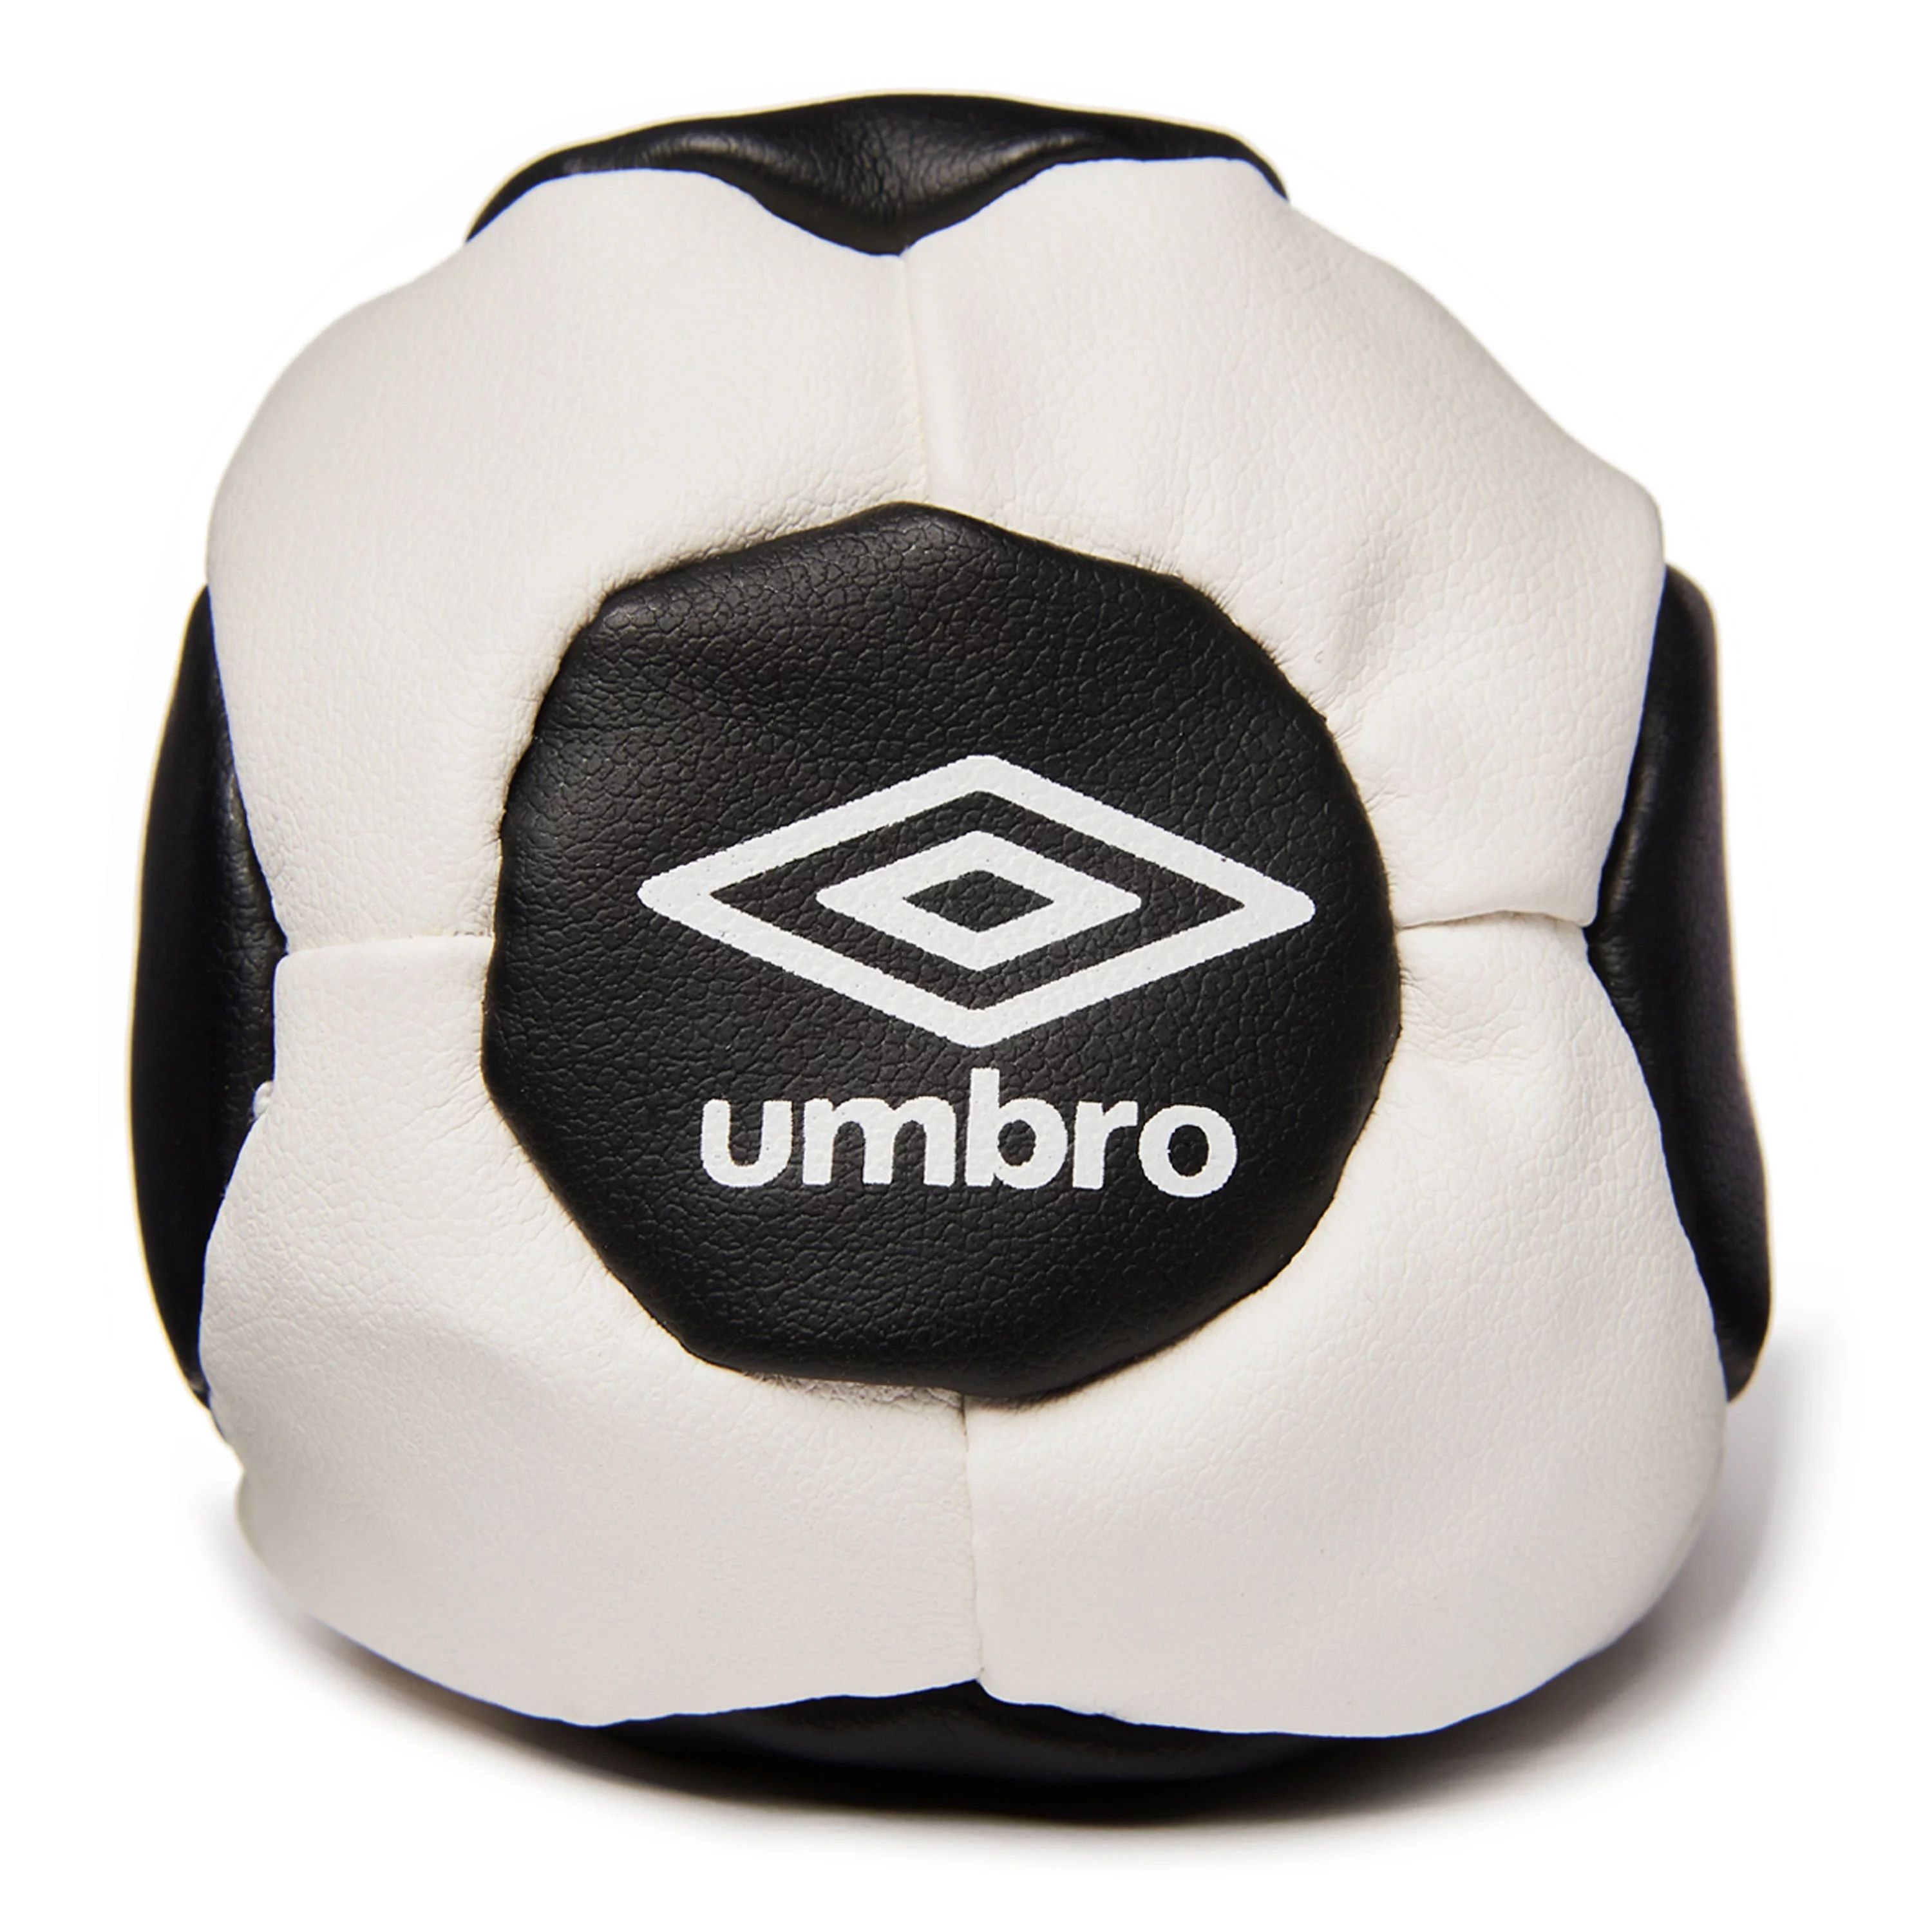 Umbro Soccer Footwork Sports Training Aid, Assorted Colors | Walmart (US)